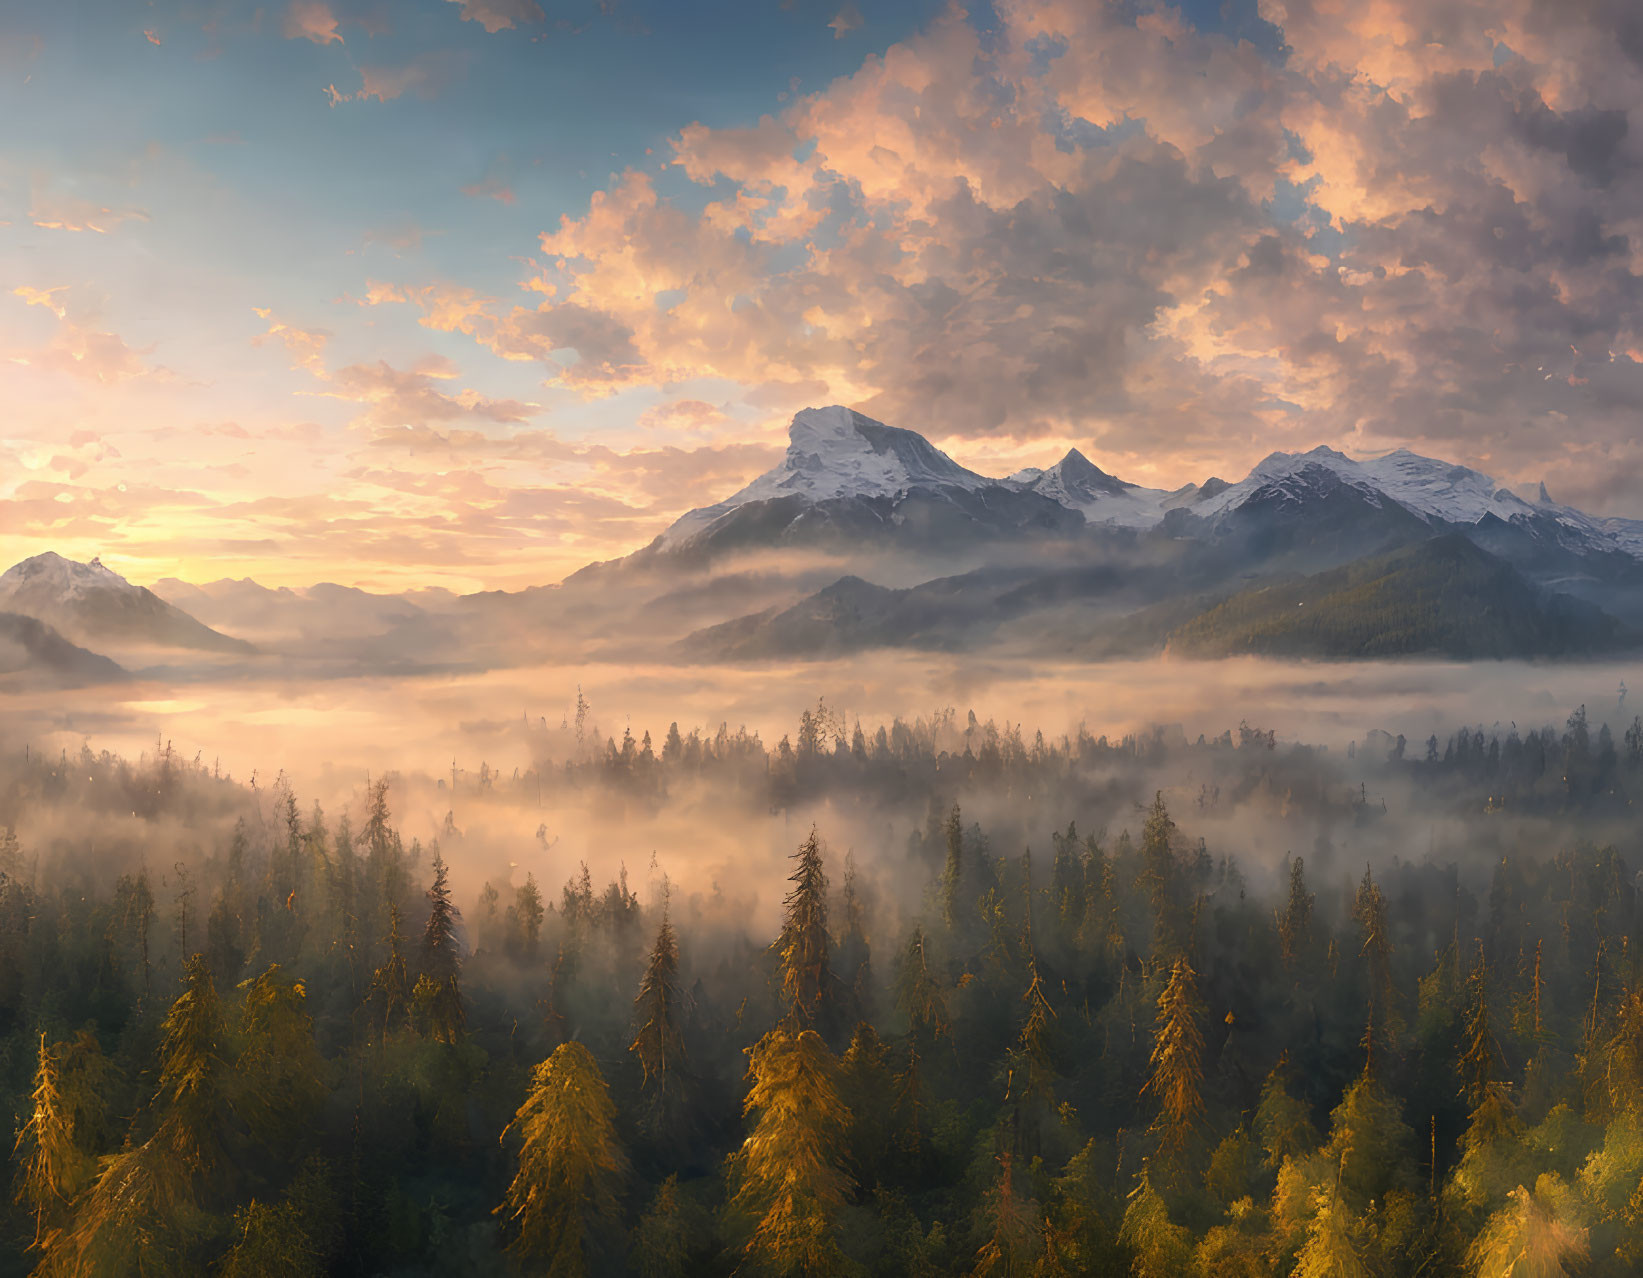 Misty forest at dawn with snowy mountains and golden sunlight